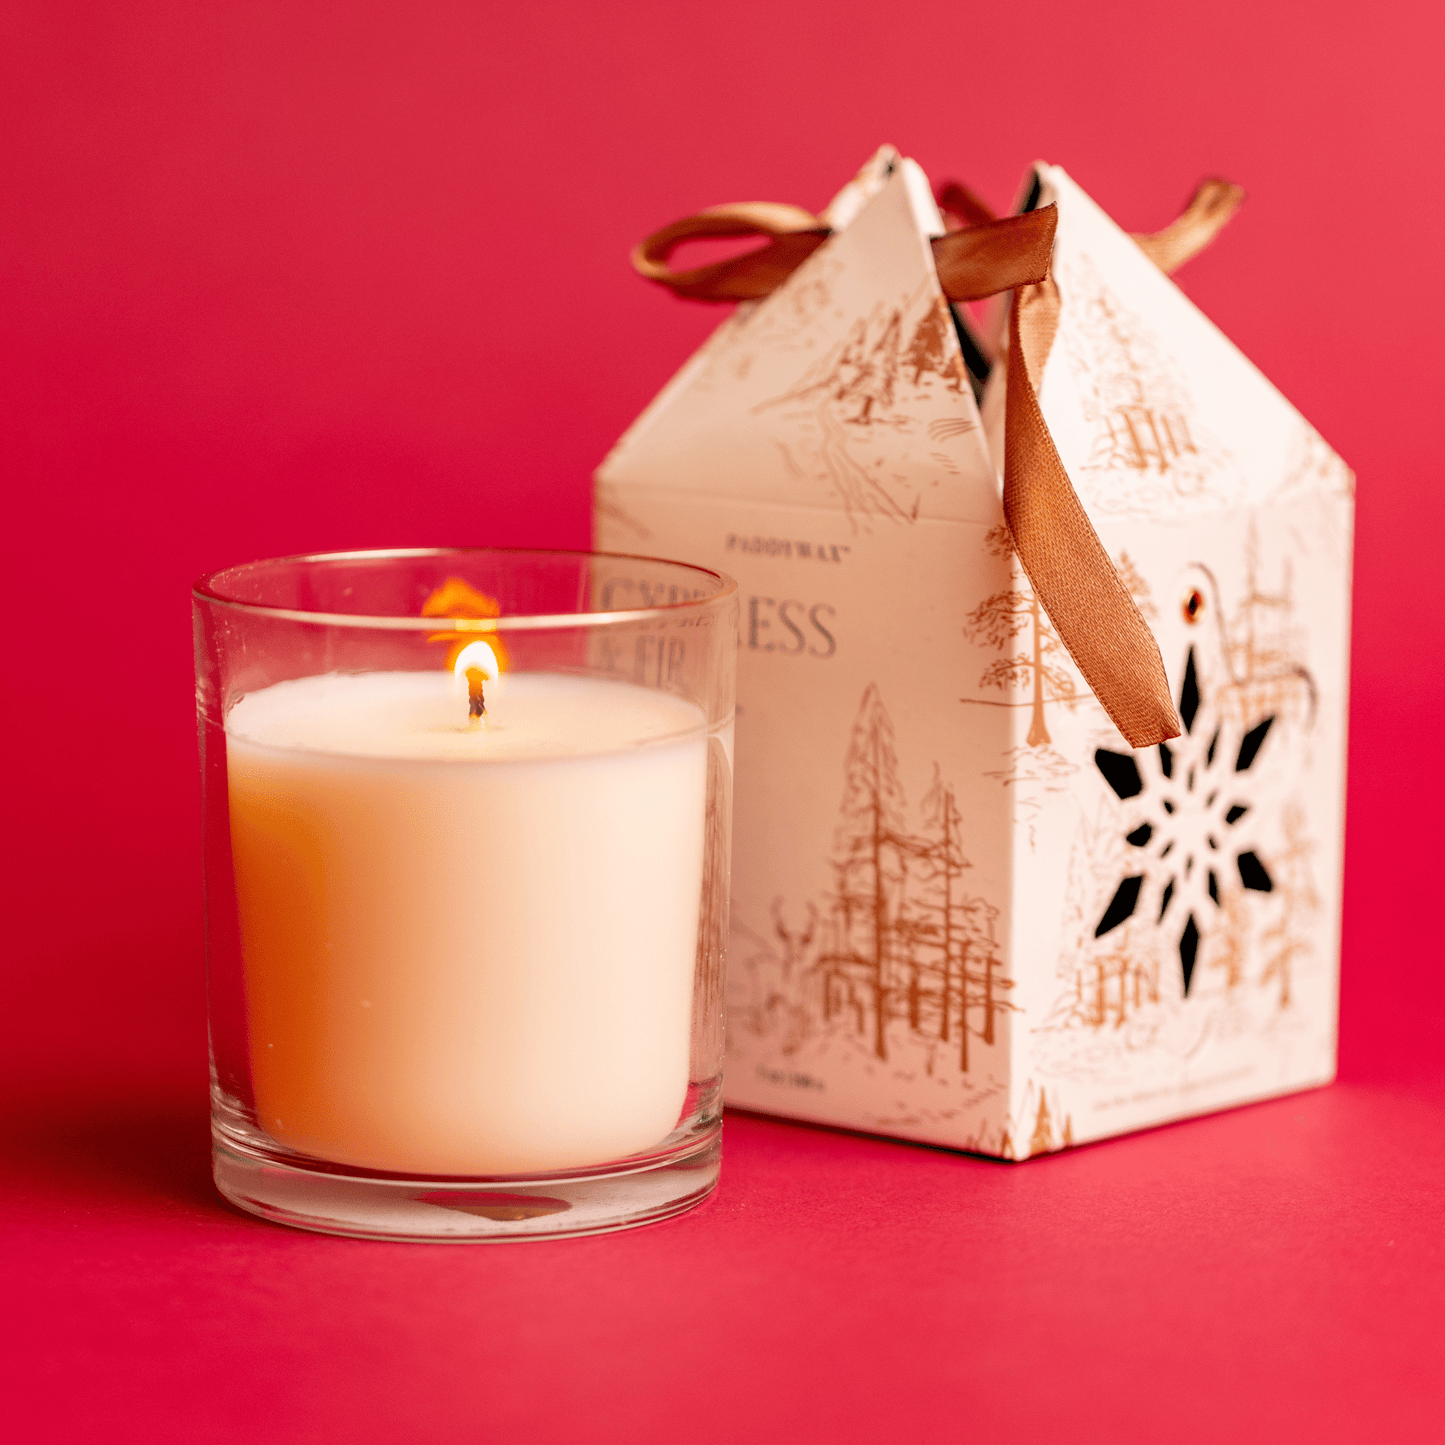 7 oz Glass Candle lit with Ornament Gift Box on red background